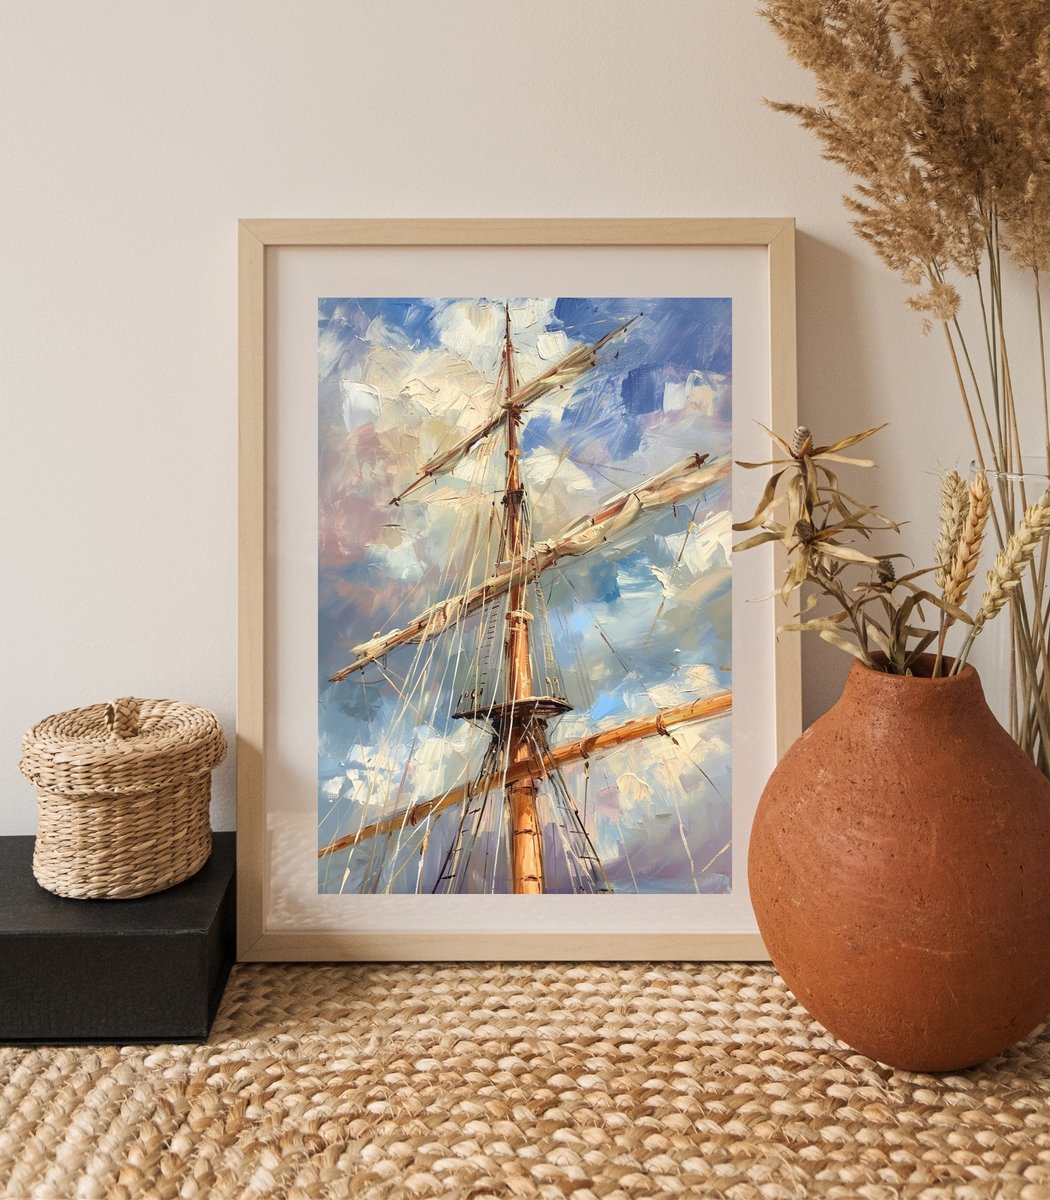 Chart a course for adventure with this nautical print from Lena Art Design! 🌊⛵ The mast reaching for the sky, every line and color sings of the sea's call. #SailAway #NauticalArt #LenaArtDesign